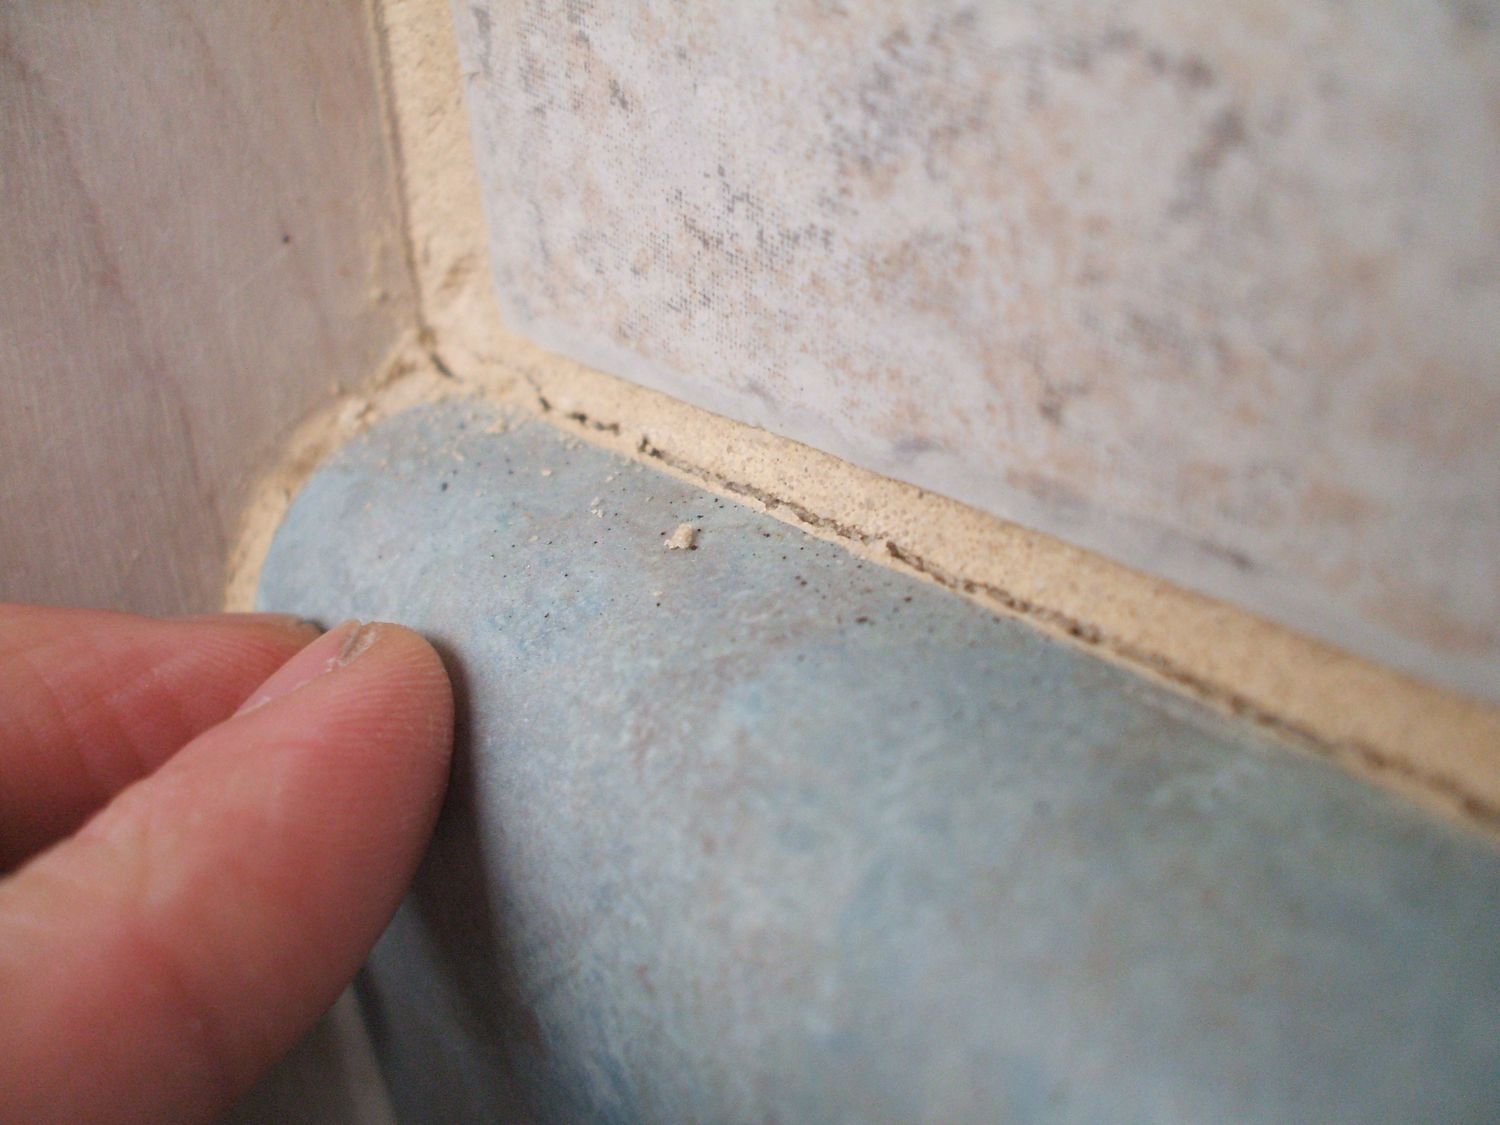 Hands putting grout between tile and non-tile materials